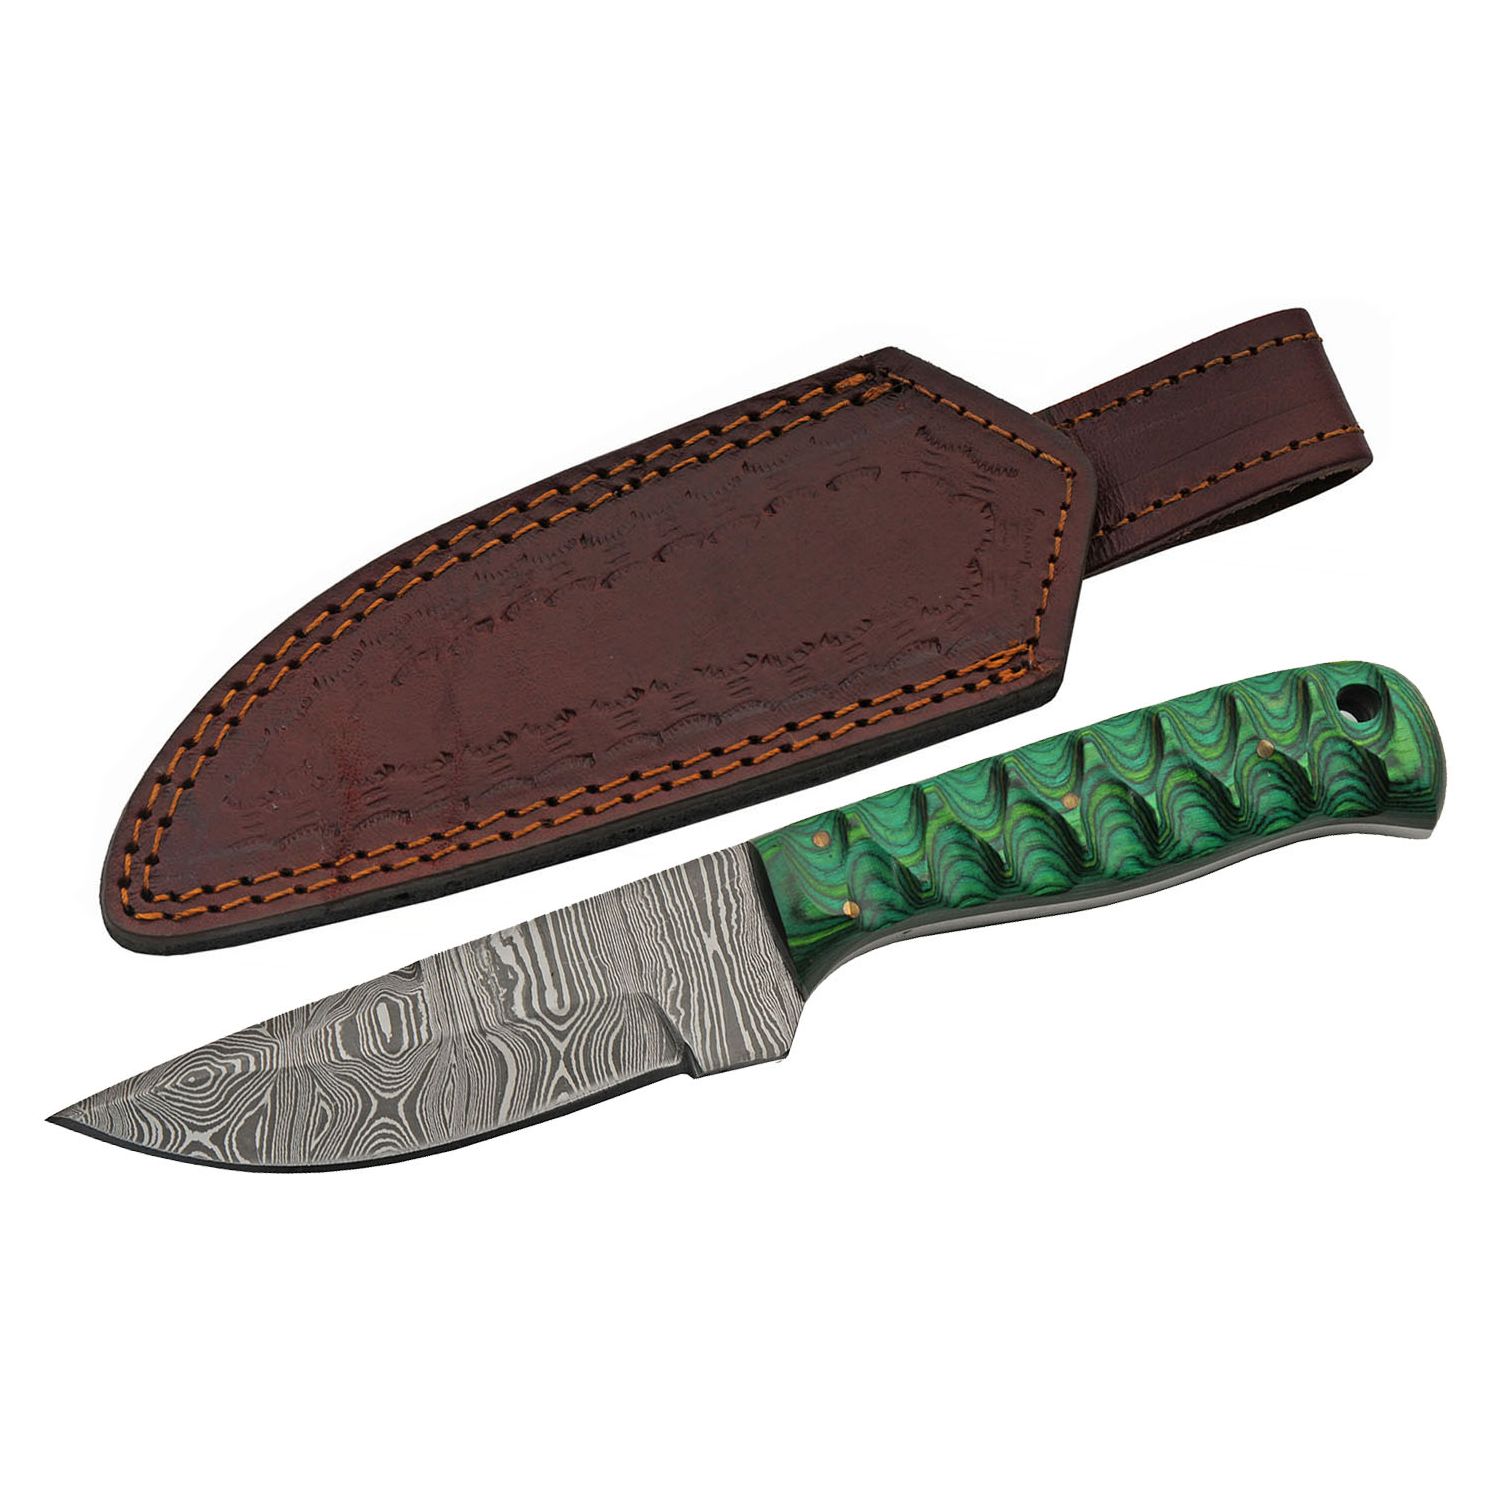 Hunting Knife | 4in. Damascus Steel Blade Green Wood Handle + Leather Sheath